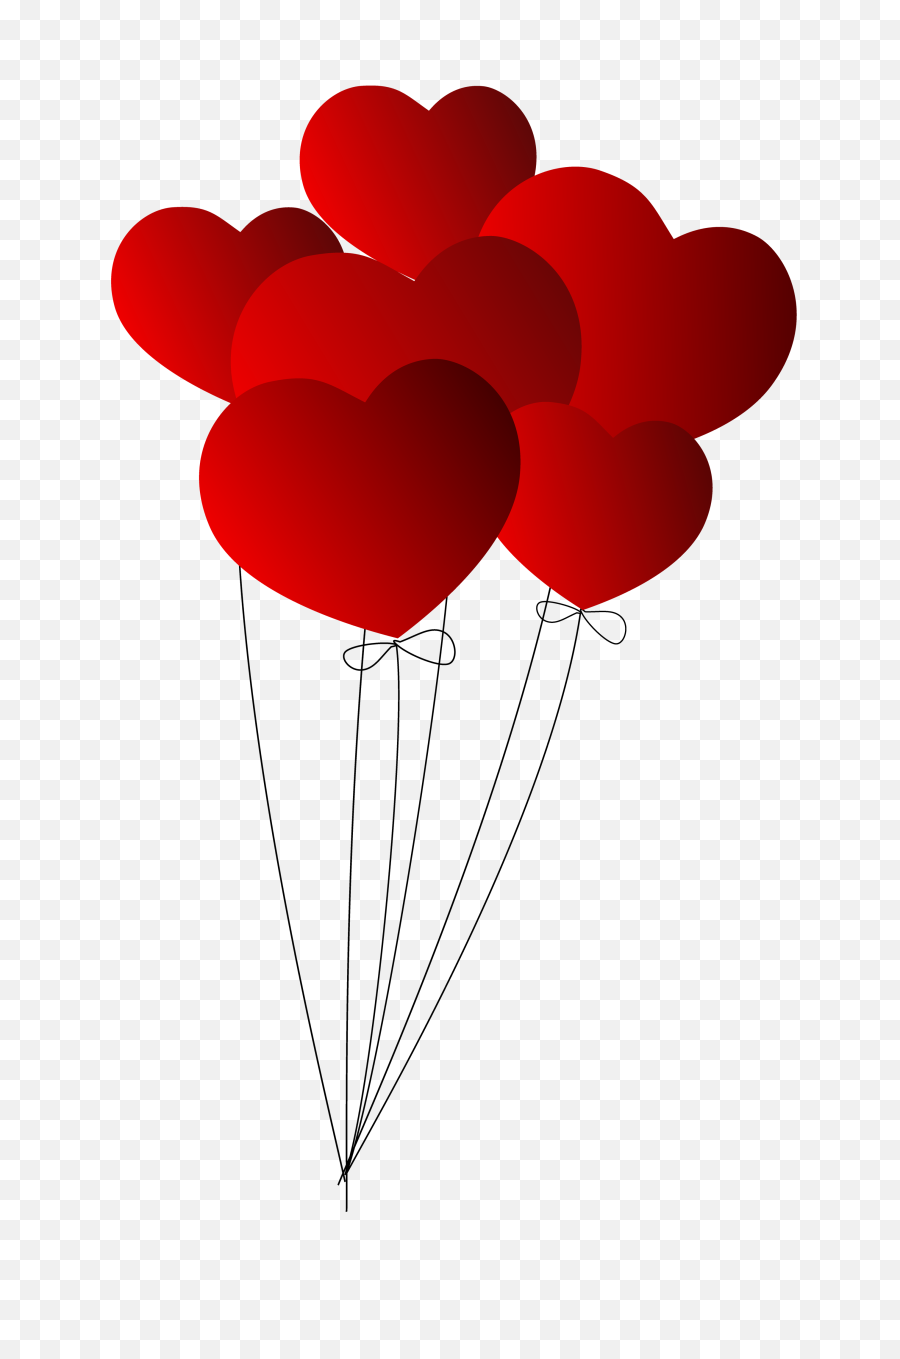 Download Hd Heart Balloon Png Image - Love Heart Balloons Png,Heart Balloon Png